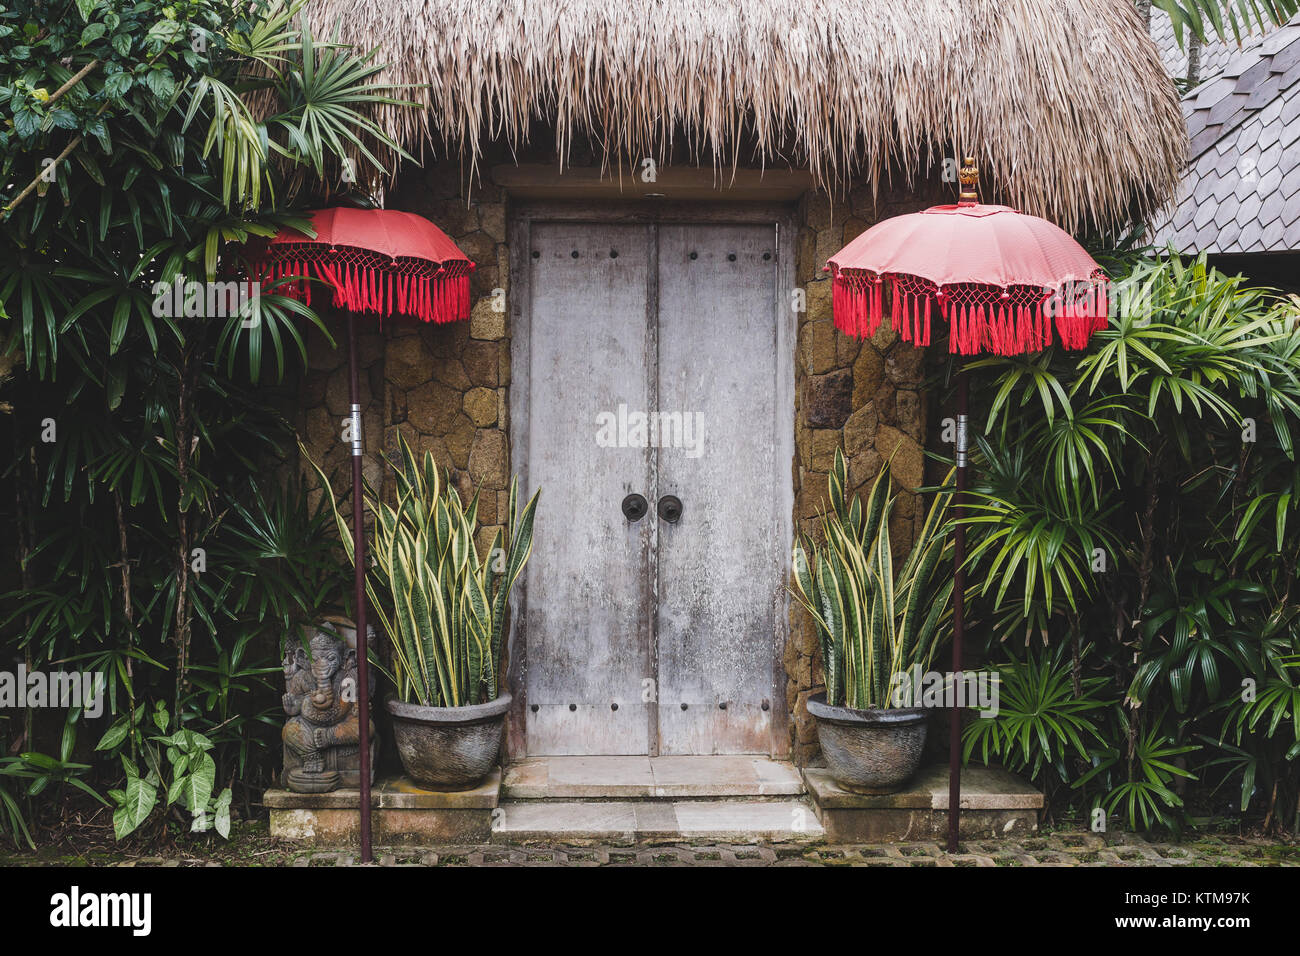 Entrance in traditional bali house with wooden door, straw roof and red  umbrellas Stock Photo - Alamy